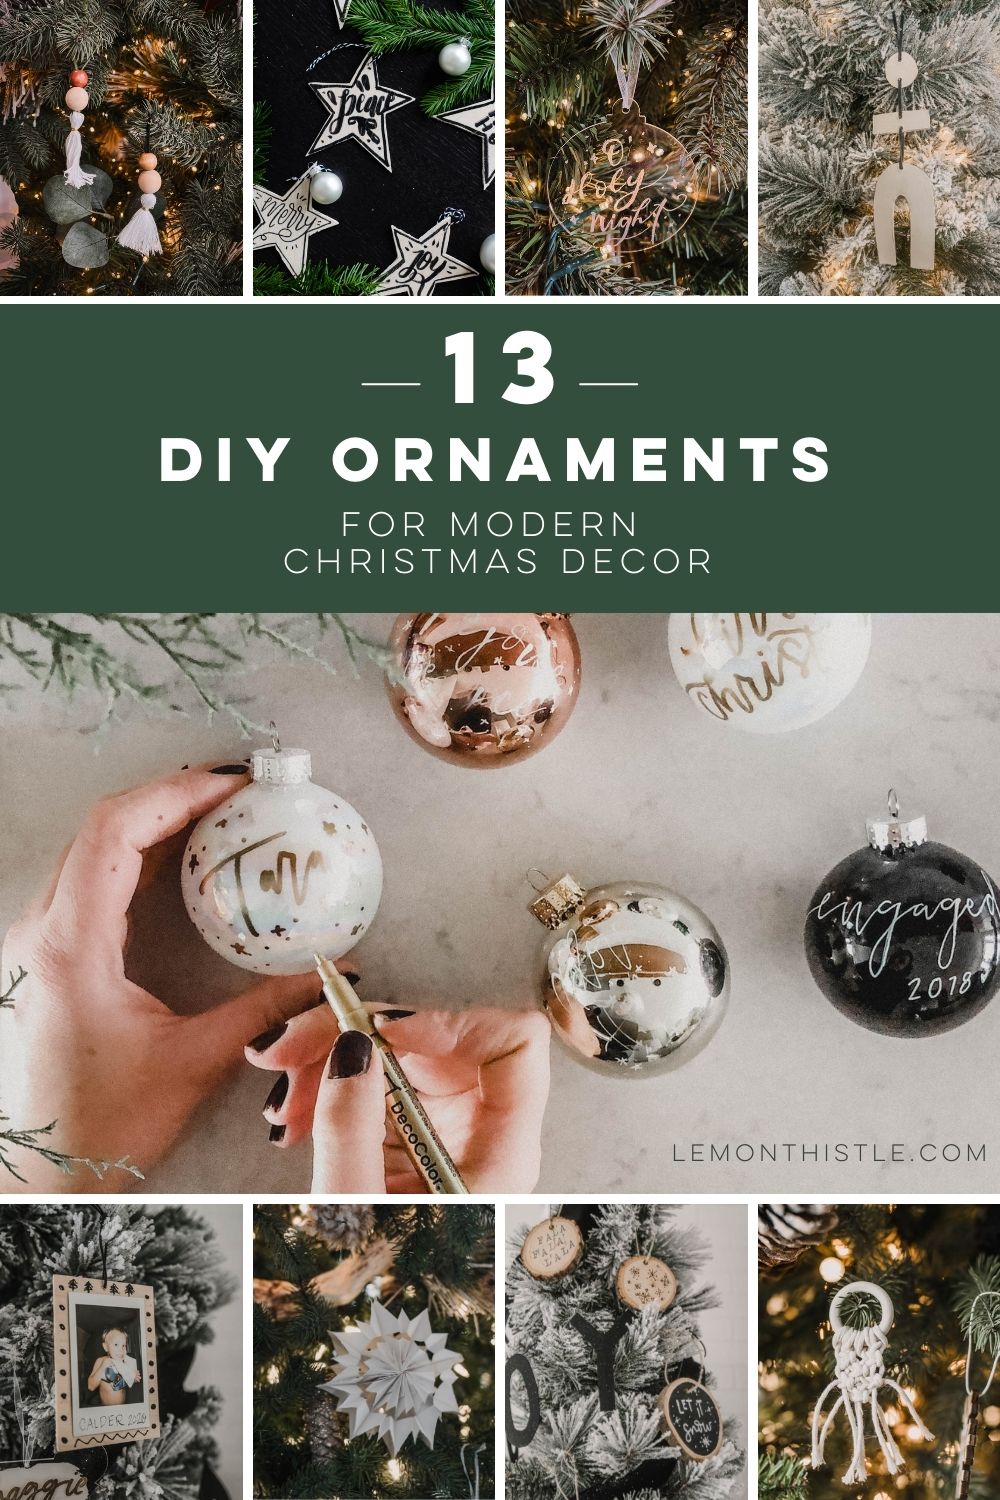 13 DIY Ornaments to make for your modern holiday decor - text voer grid of images